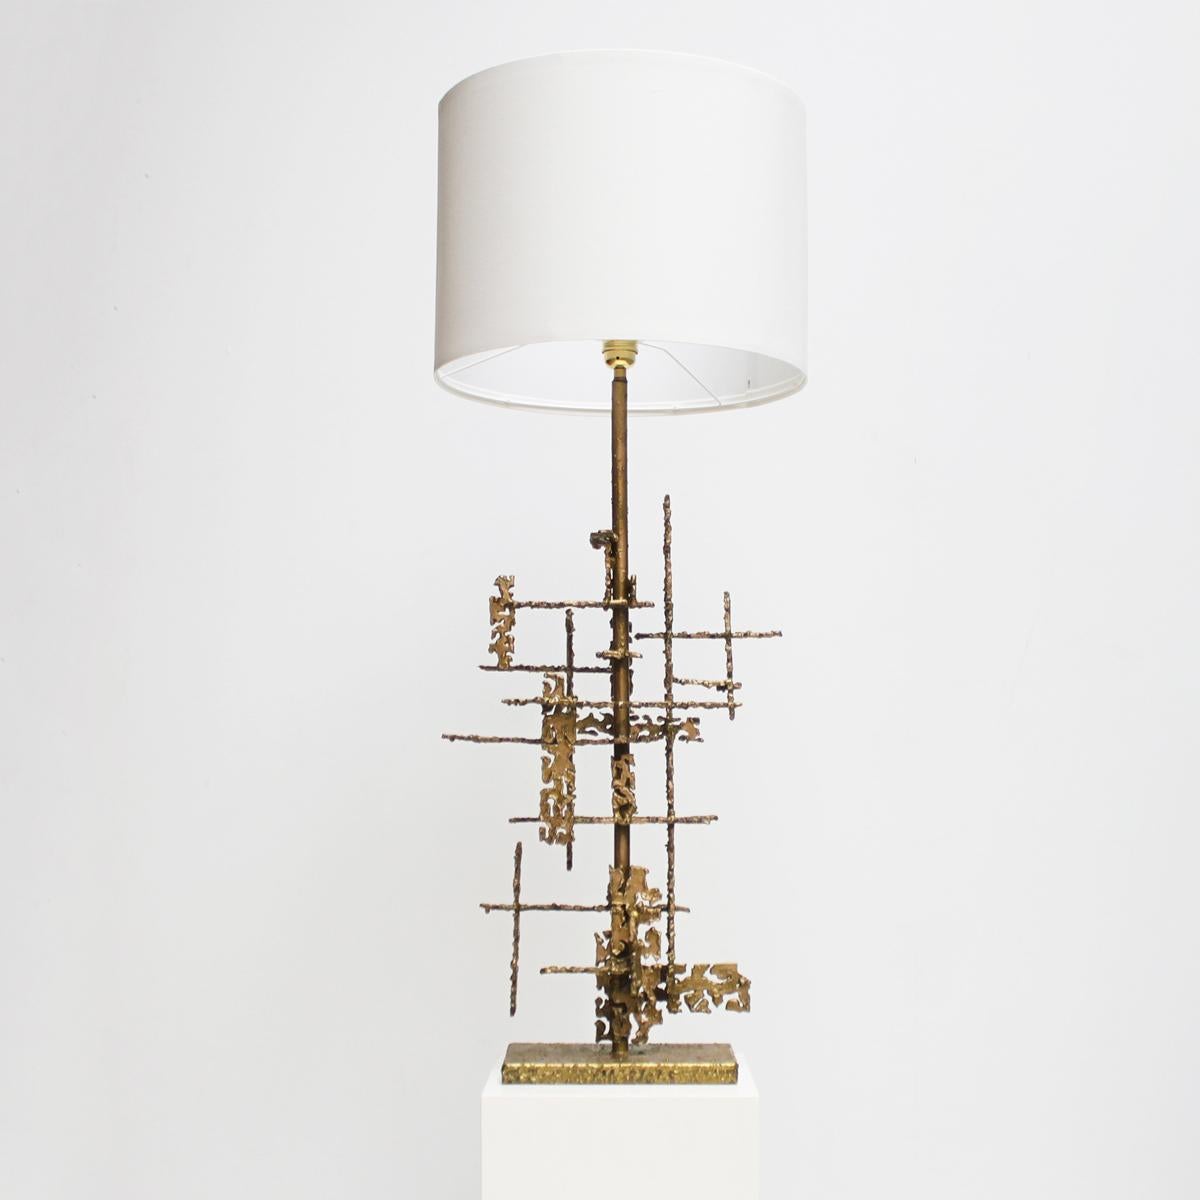 Large 'Brutalist' table light by Marcello Fantoni, Firenze, Italy, 1955.
Sculpture table lamp designed by Marcello Fantoni, Florence Italy (stamped on underside base) circa 1955. Wrought from an array of torch cut and welded iron. The base is a